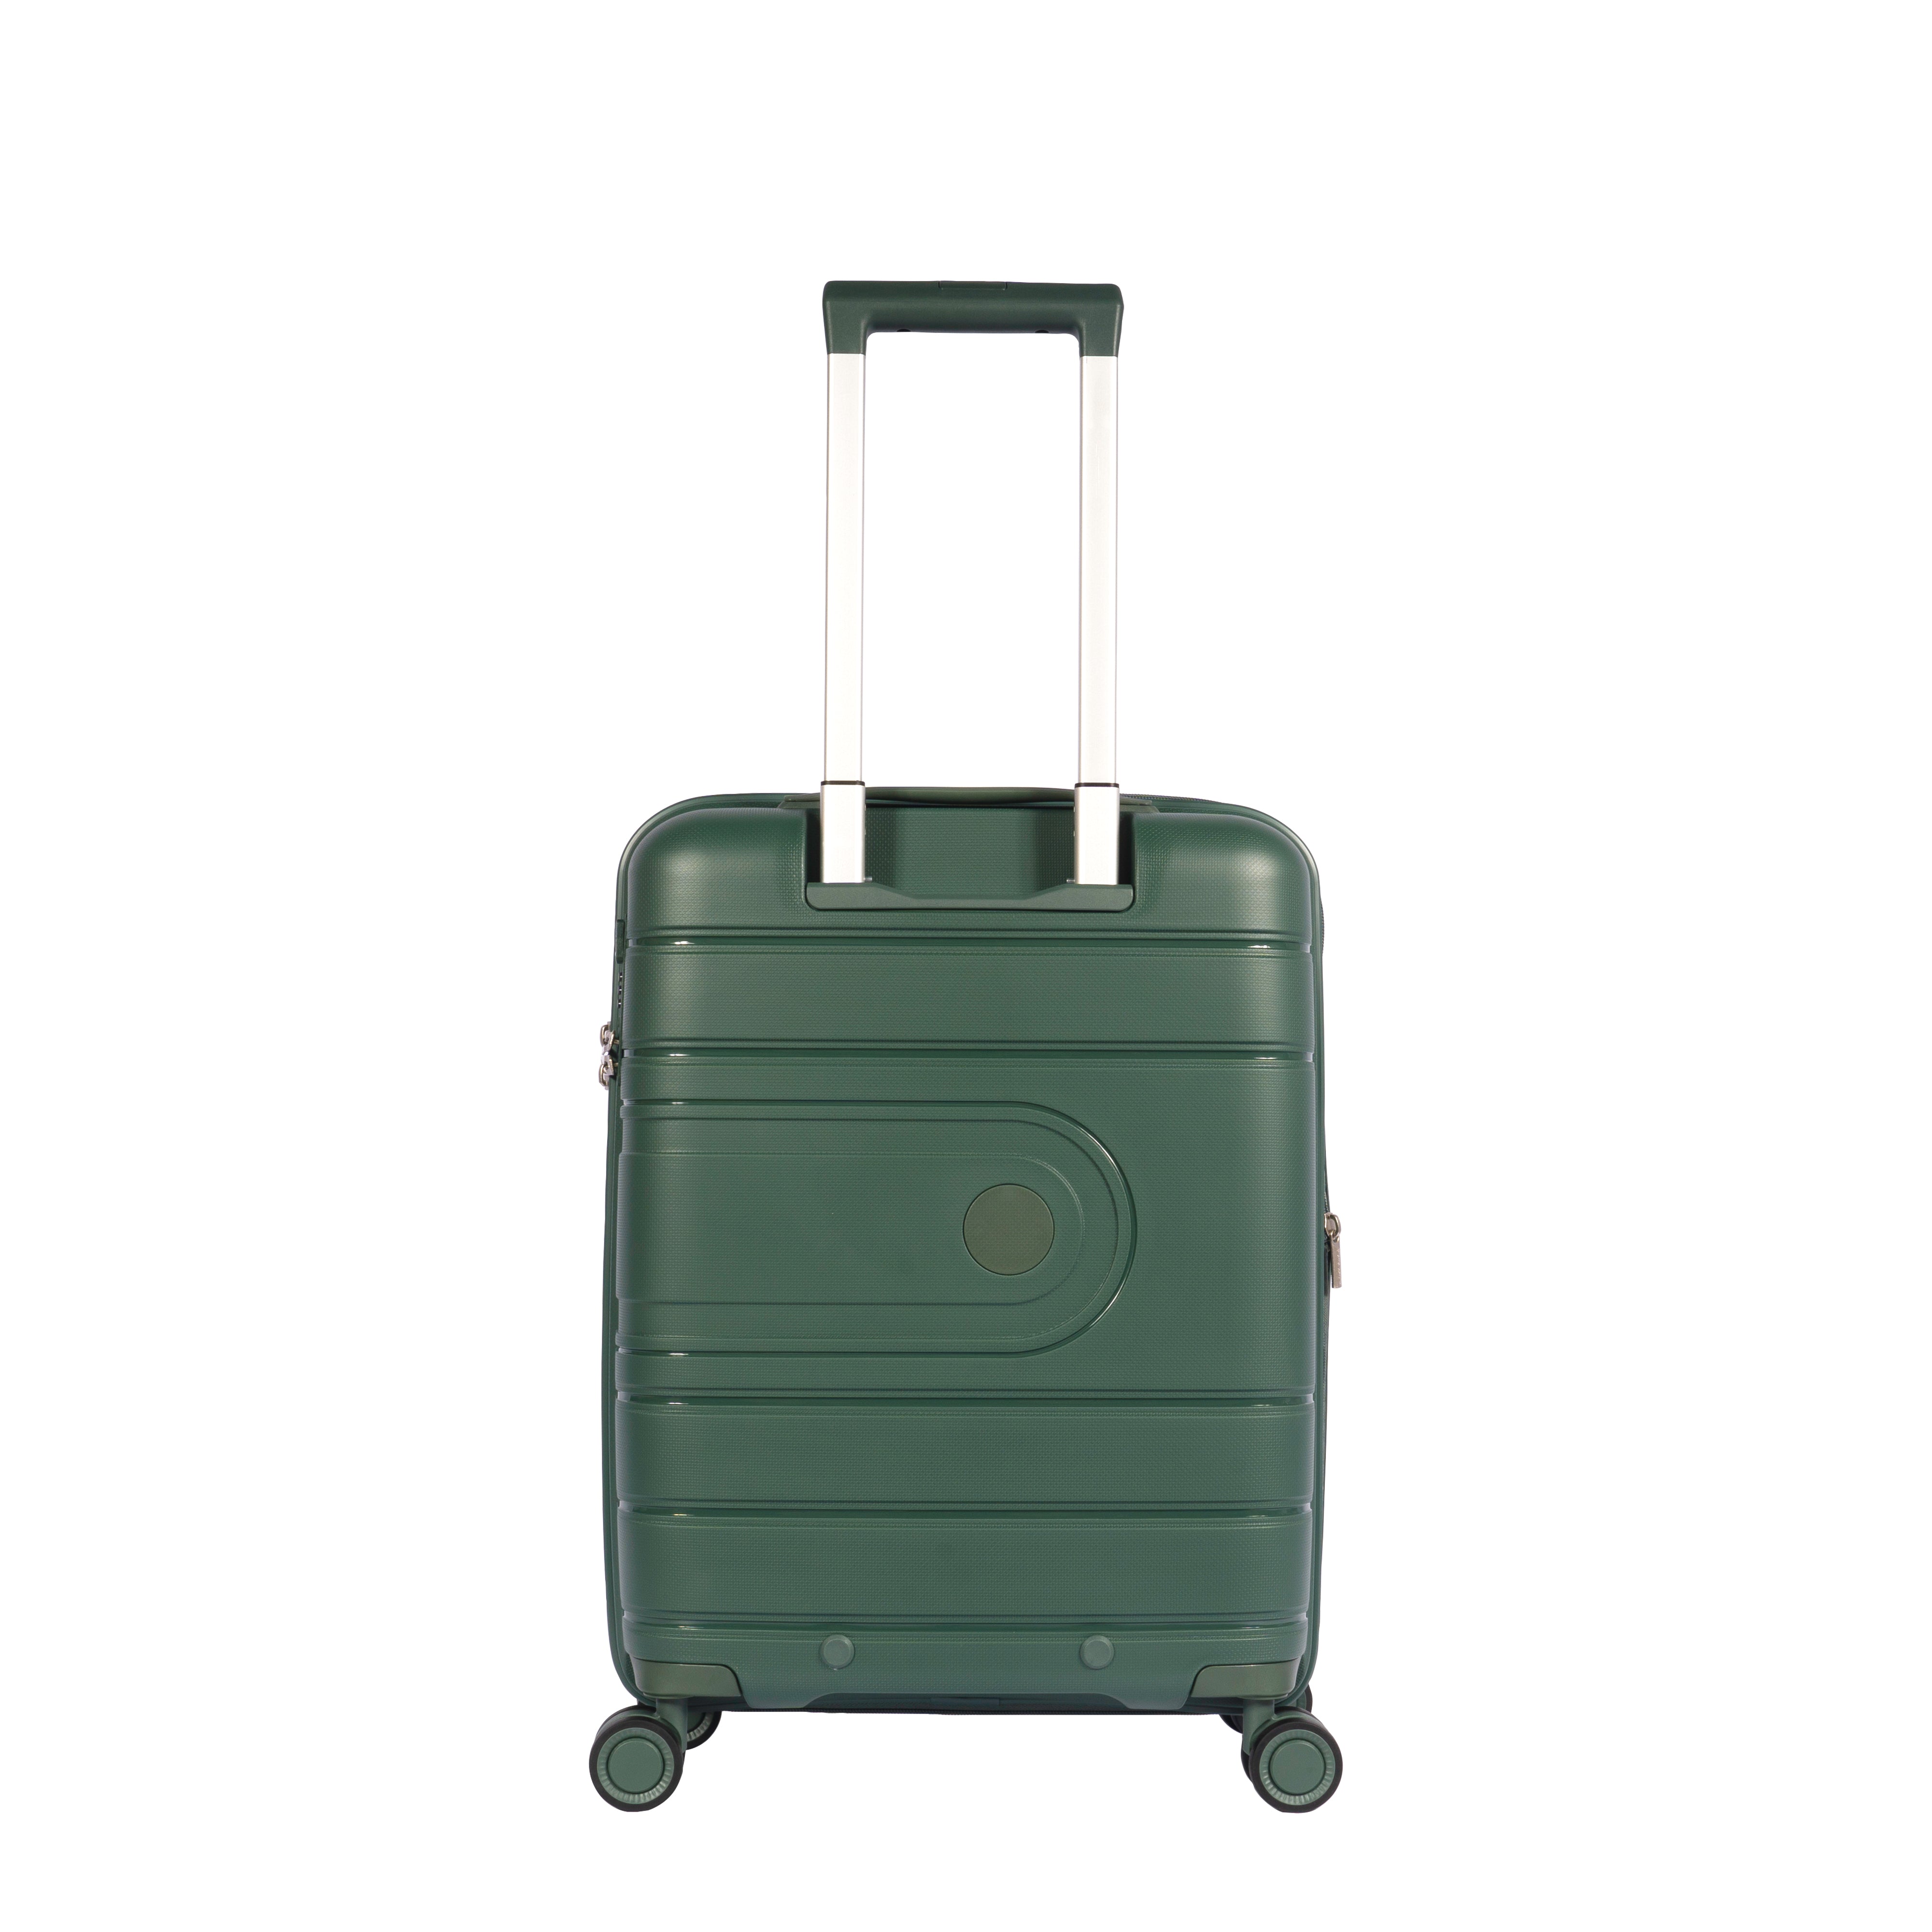 Pierre Cardin New Collection Hardcase Trolley Set Of 4T - Green